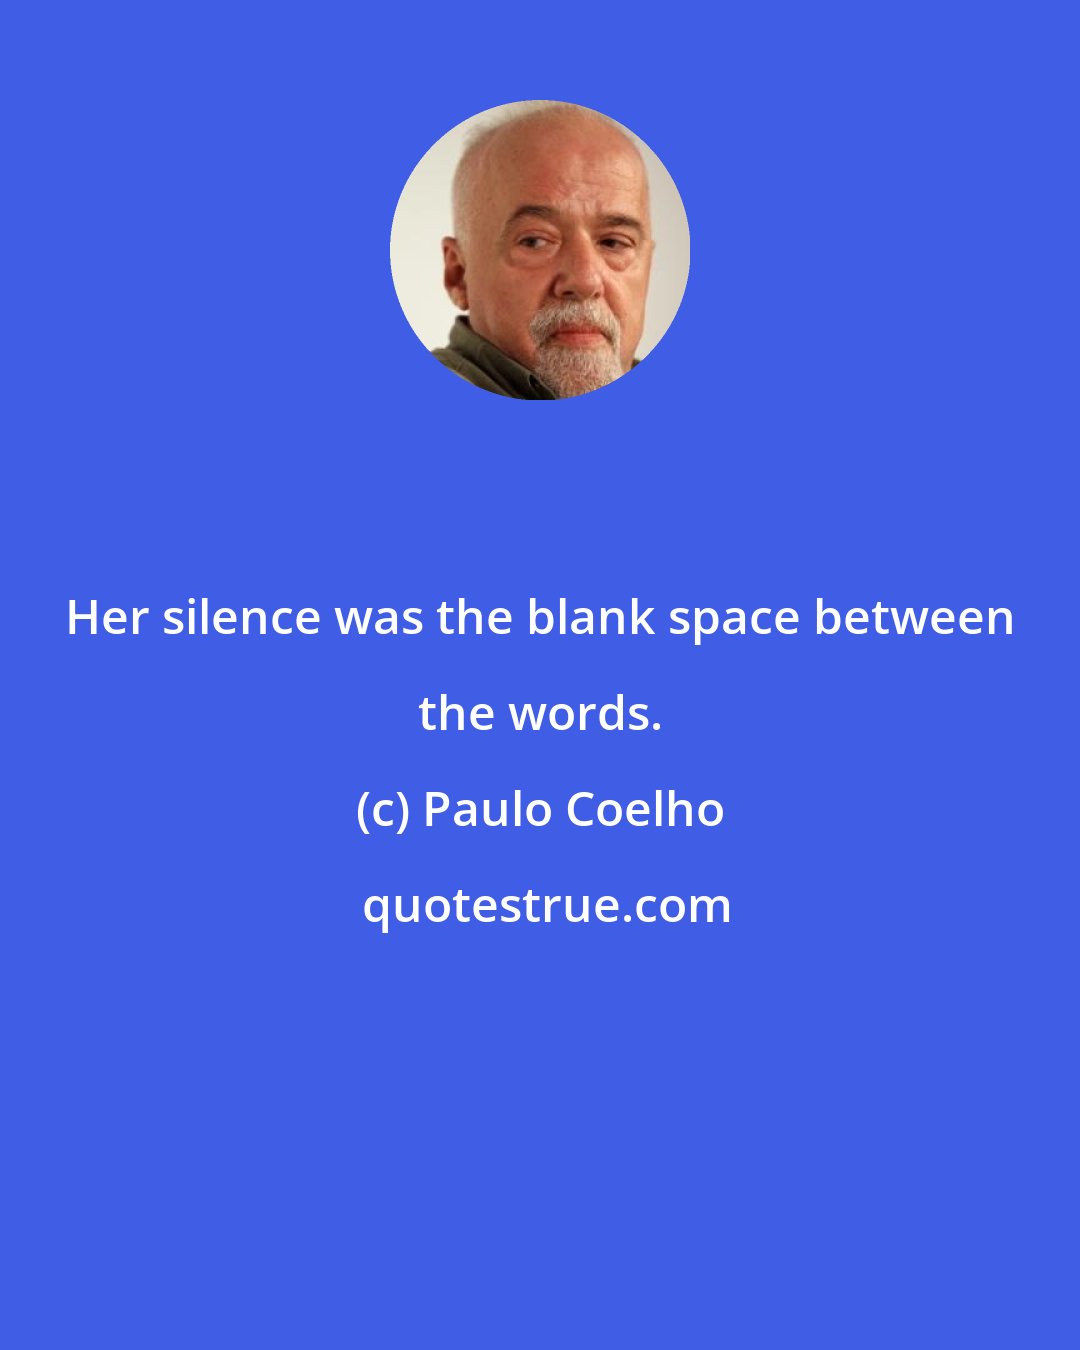 Paulo Coelho: Her silence was the blank space between the words.